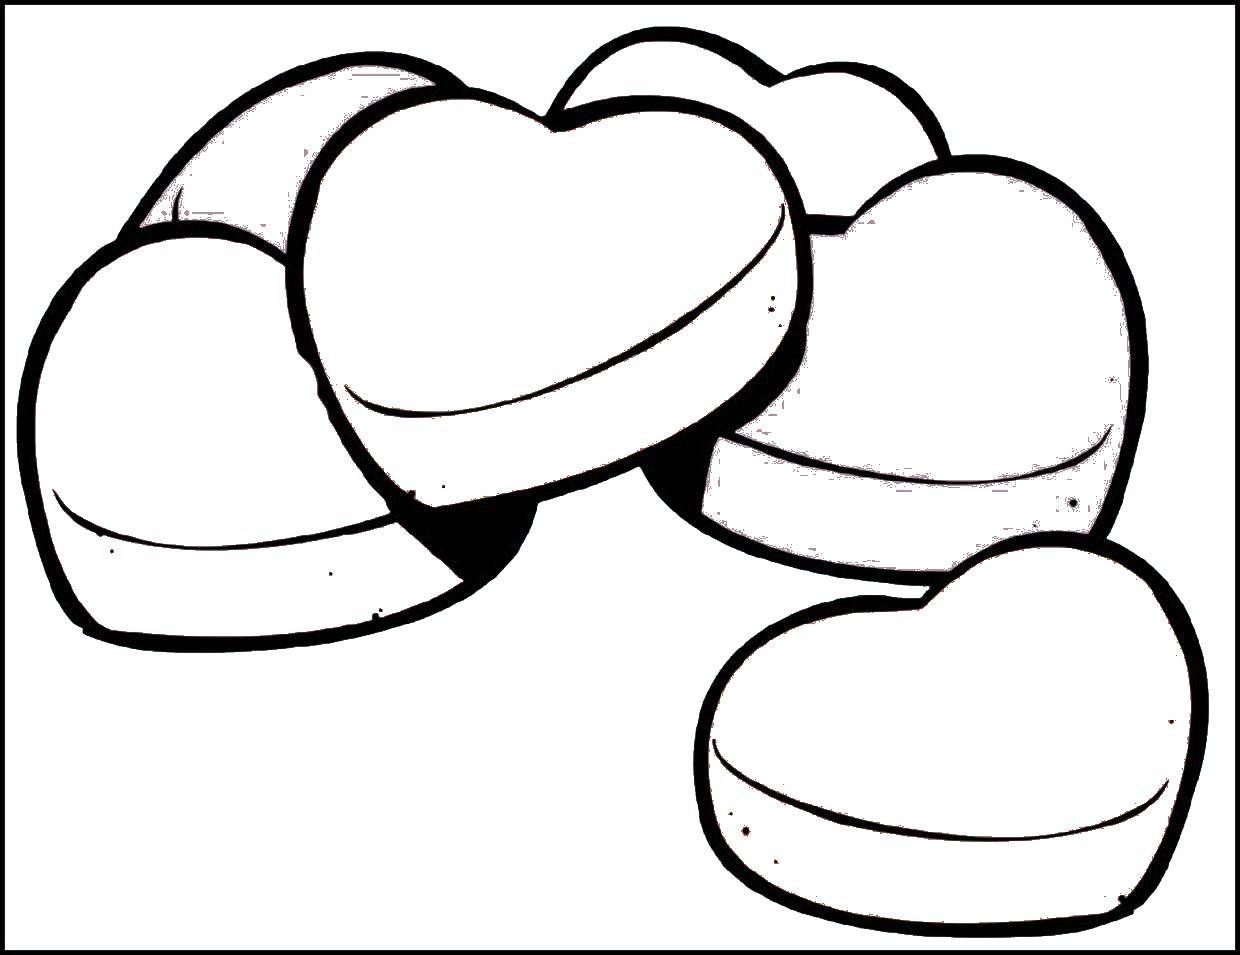 Coloring Cookies in the shape of hearts. Category Valentines day. Tags:  Valentines day, love, heart.